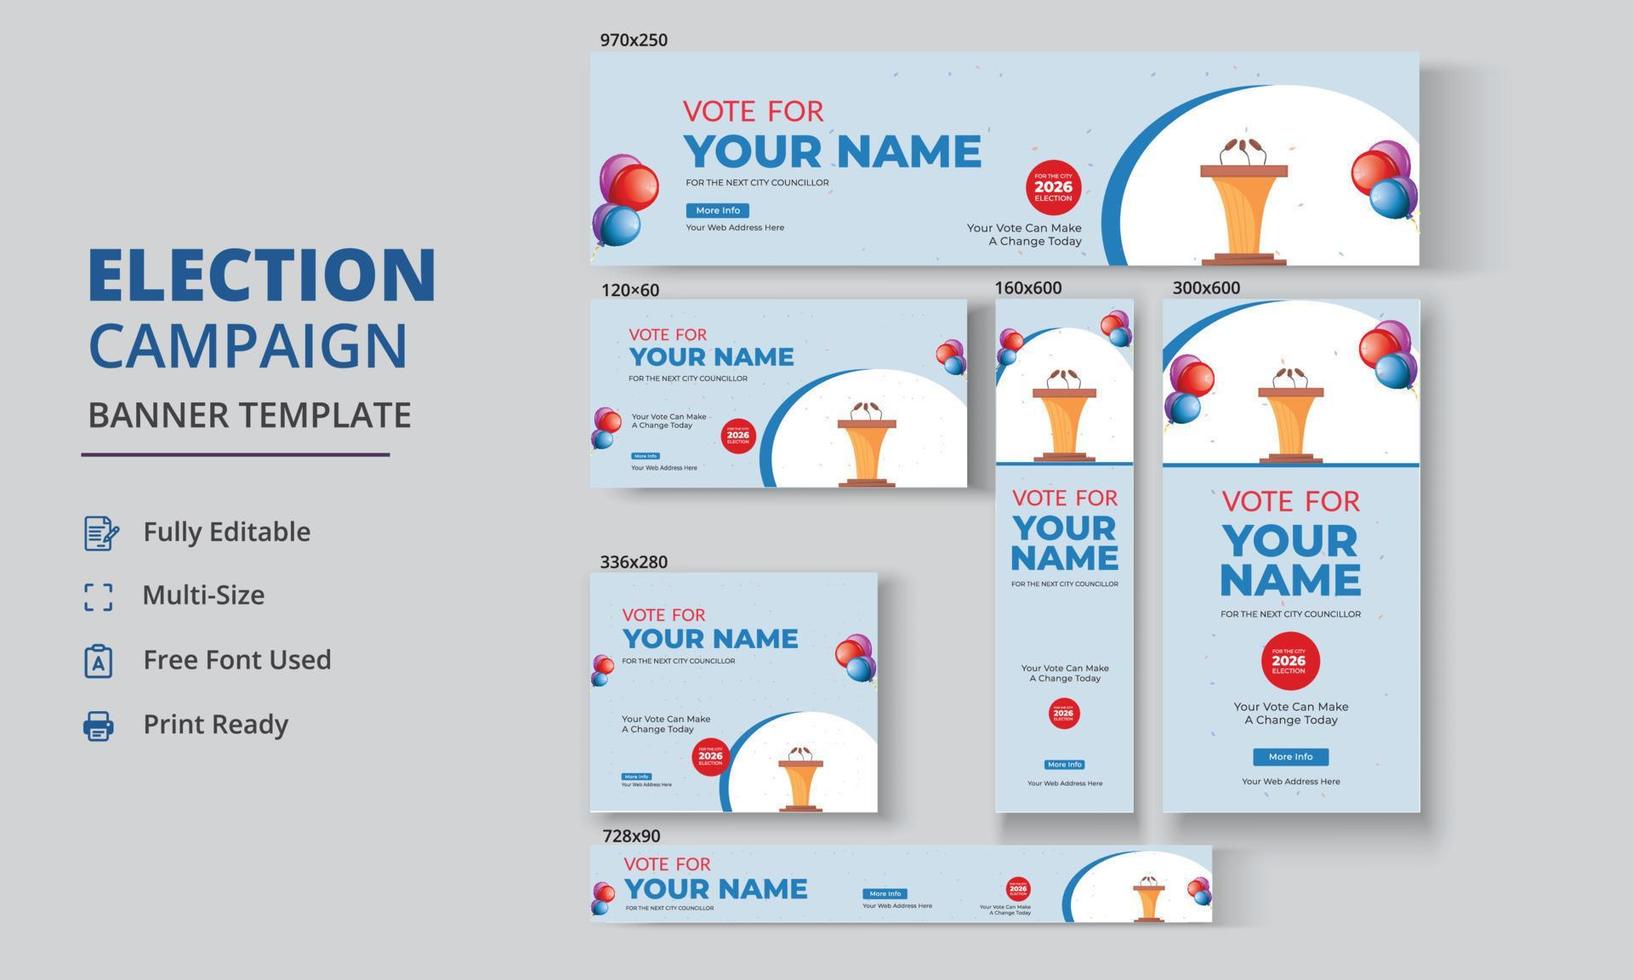 Election Campaign Banner Template, Political Campaign Banner Template, Vote Banner Template, Political Election Poster vector